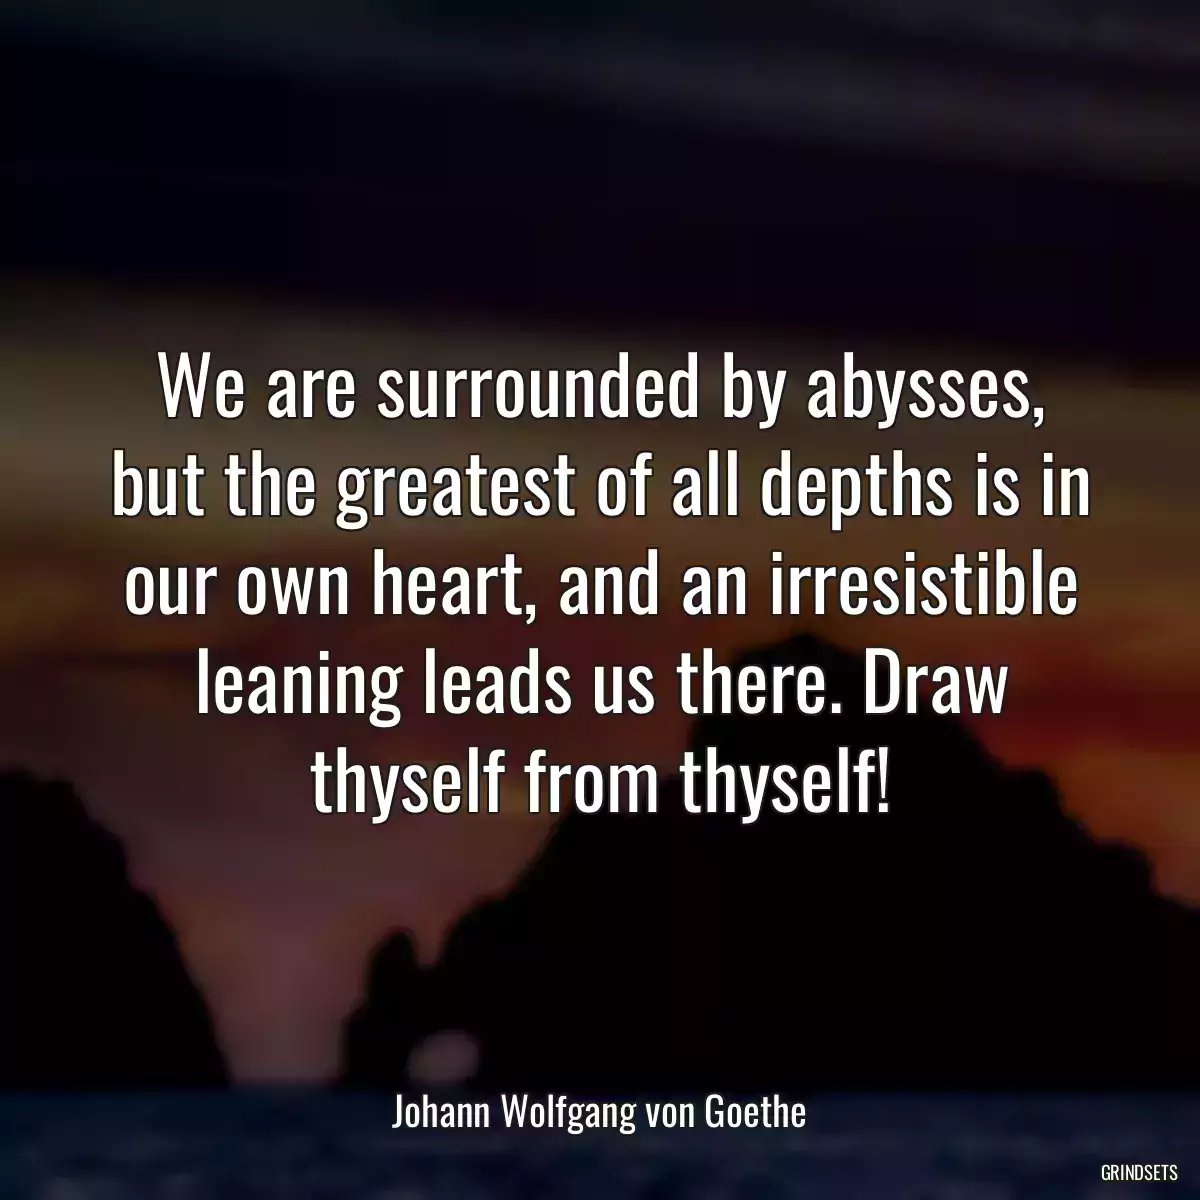 We are surrounded by abysses, but the greatest of all depths is in our own heart, and an irresistible leaning leads us there. Draw thyself from thyself!